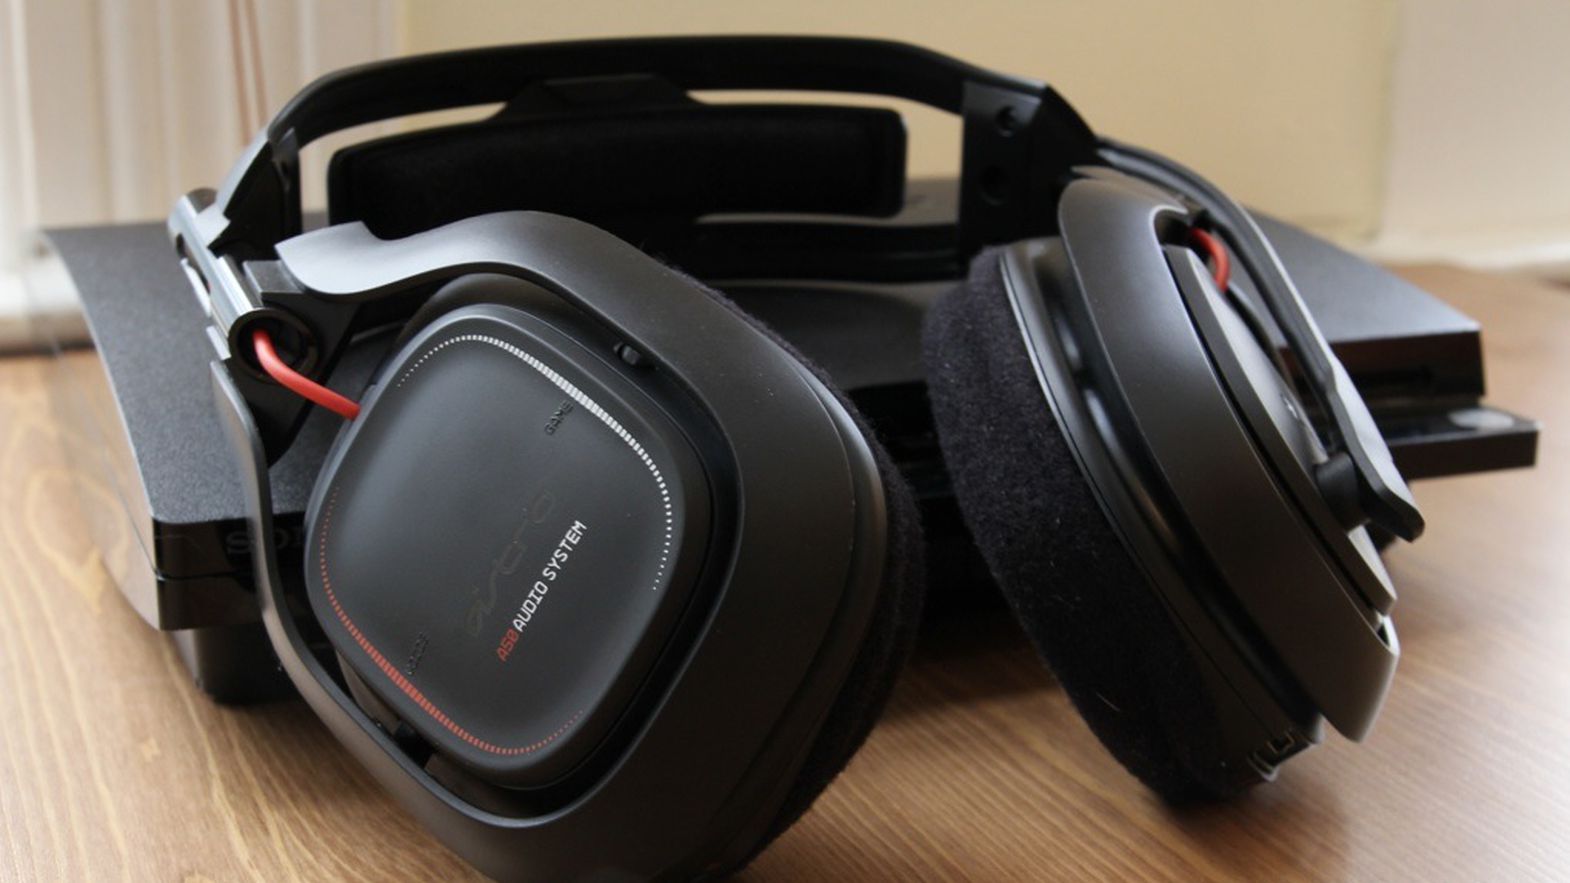 Astro A50 wireless gaming headset review - The Verge